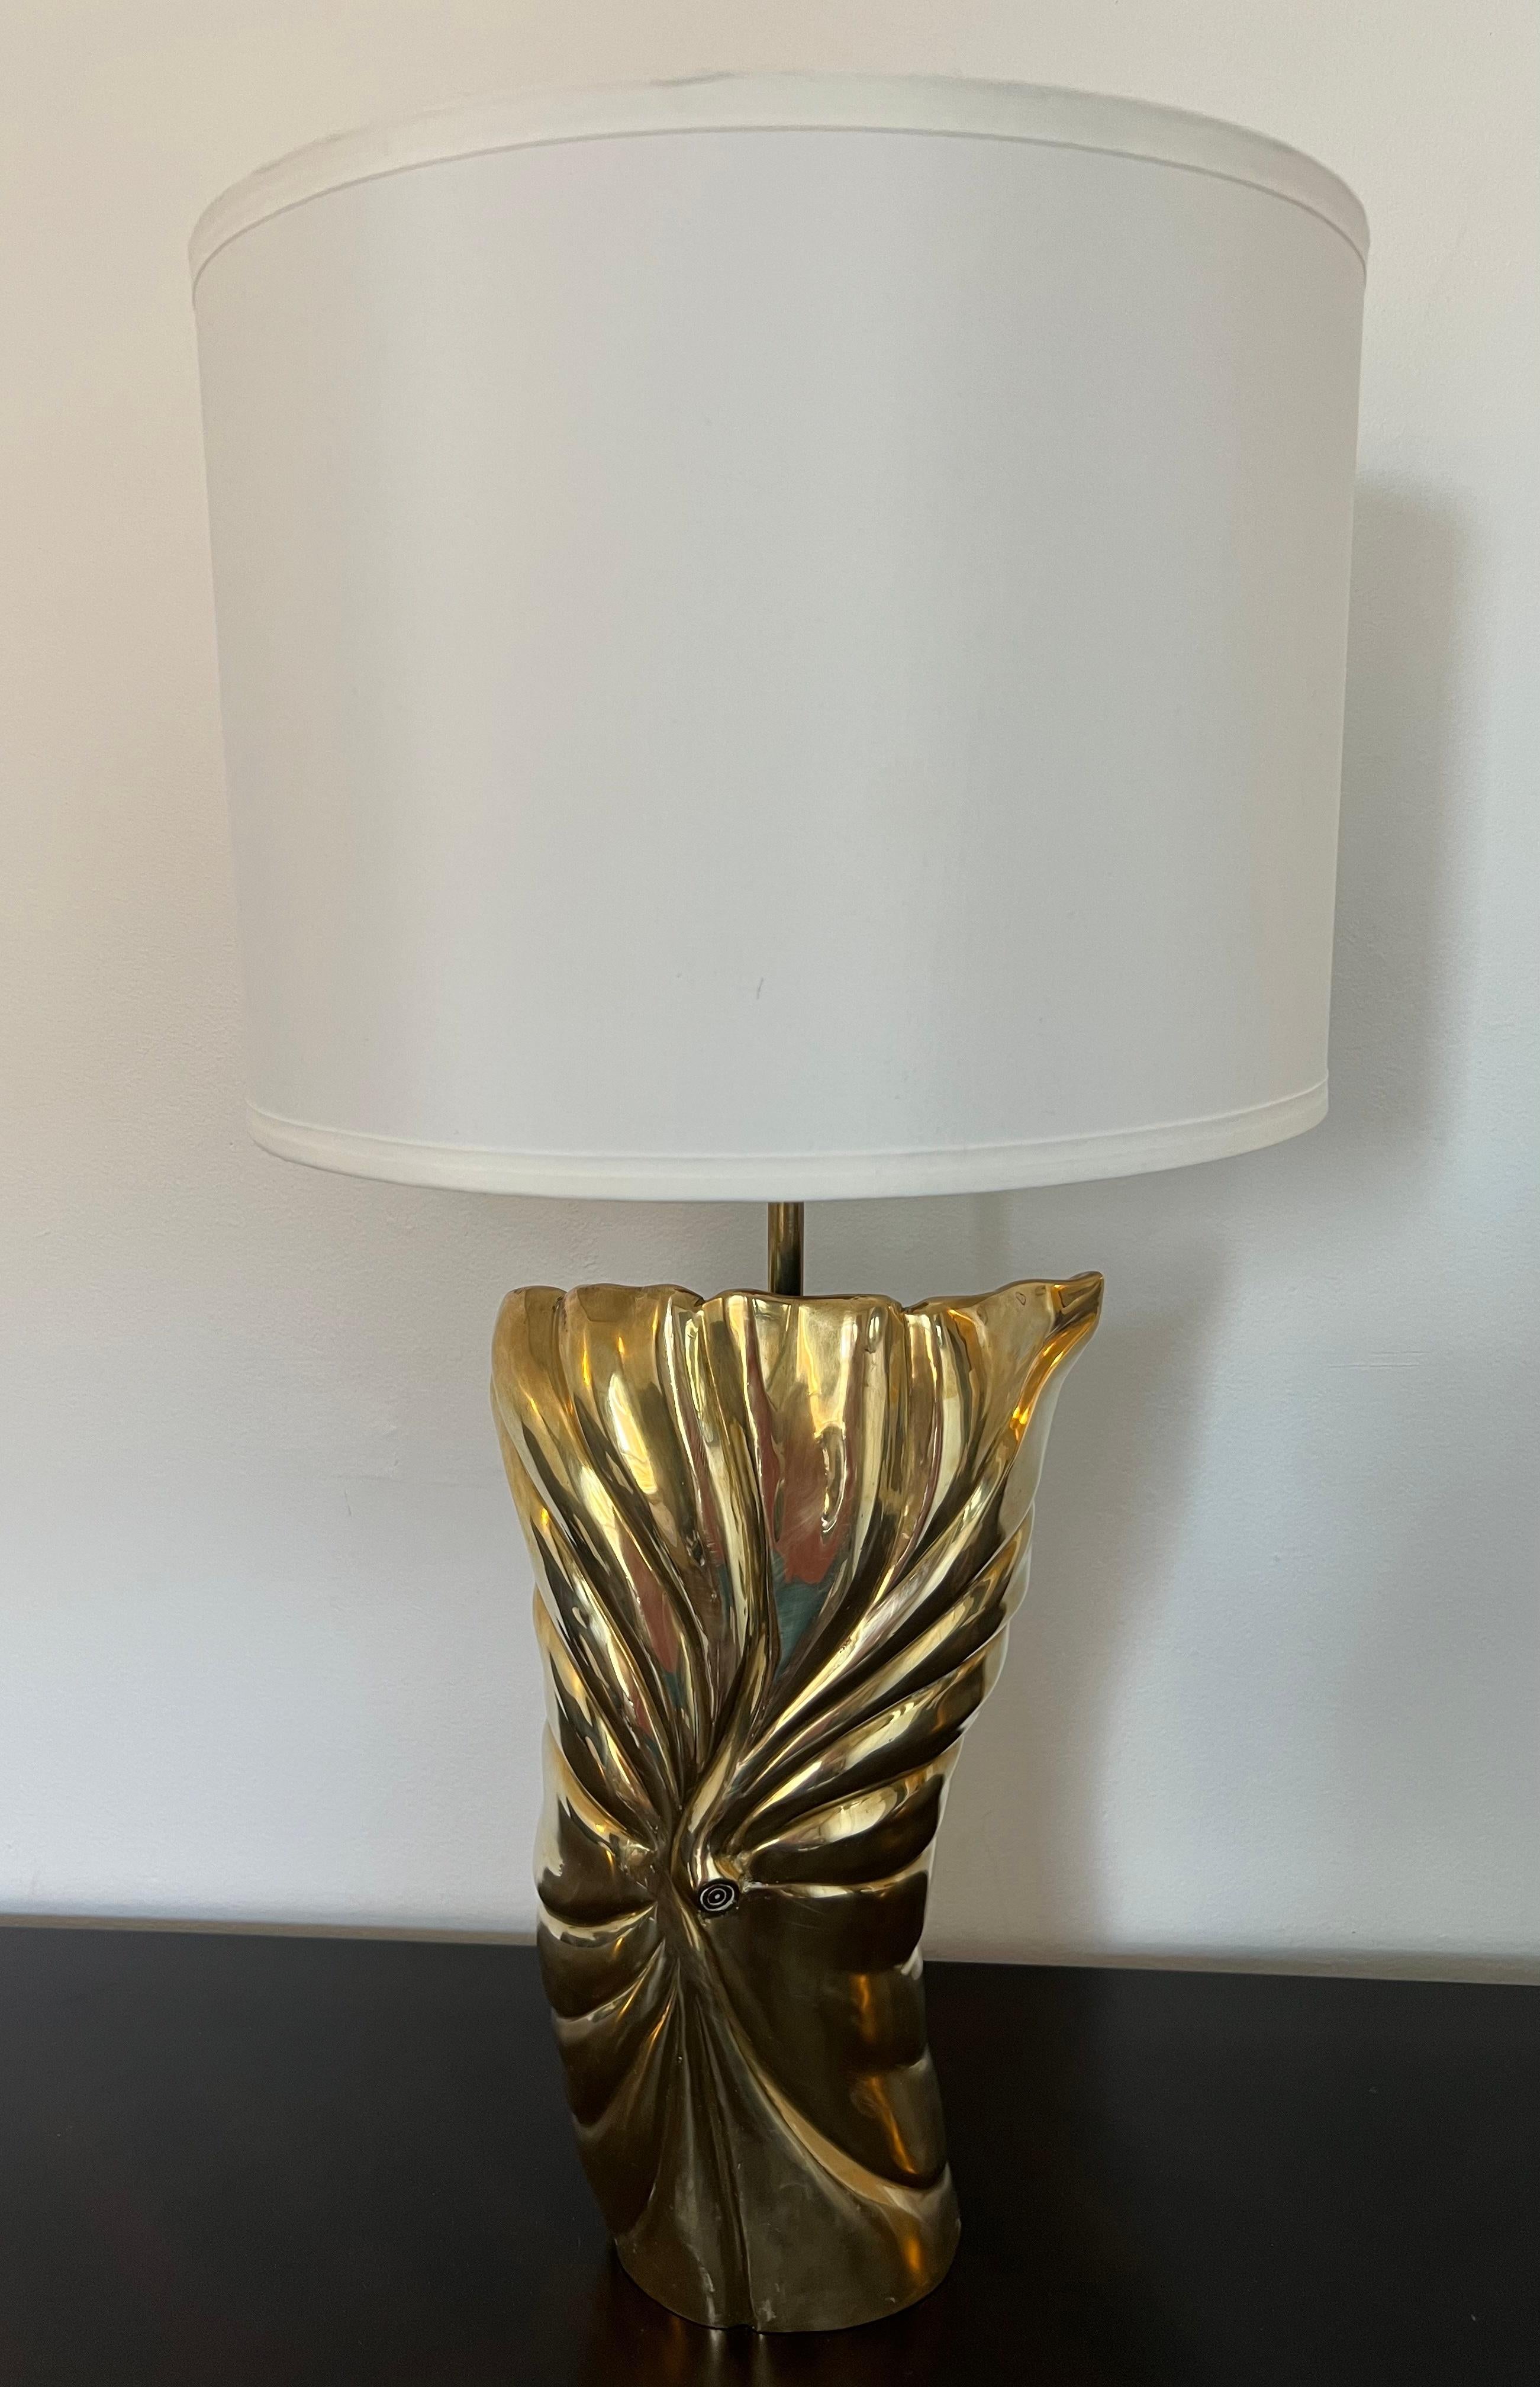 A 1980s American sculptural polished bronze table lamp with double sockets and silk cord by Chapman lighting. Rewired.